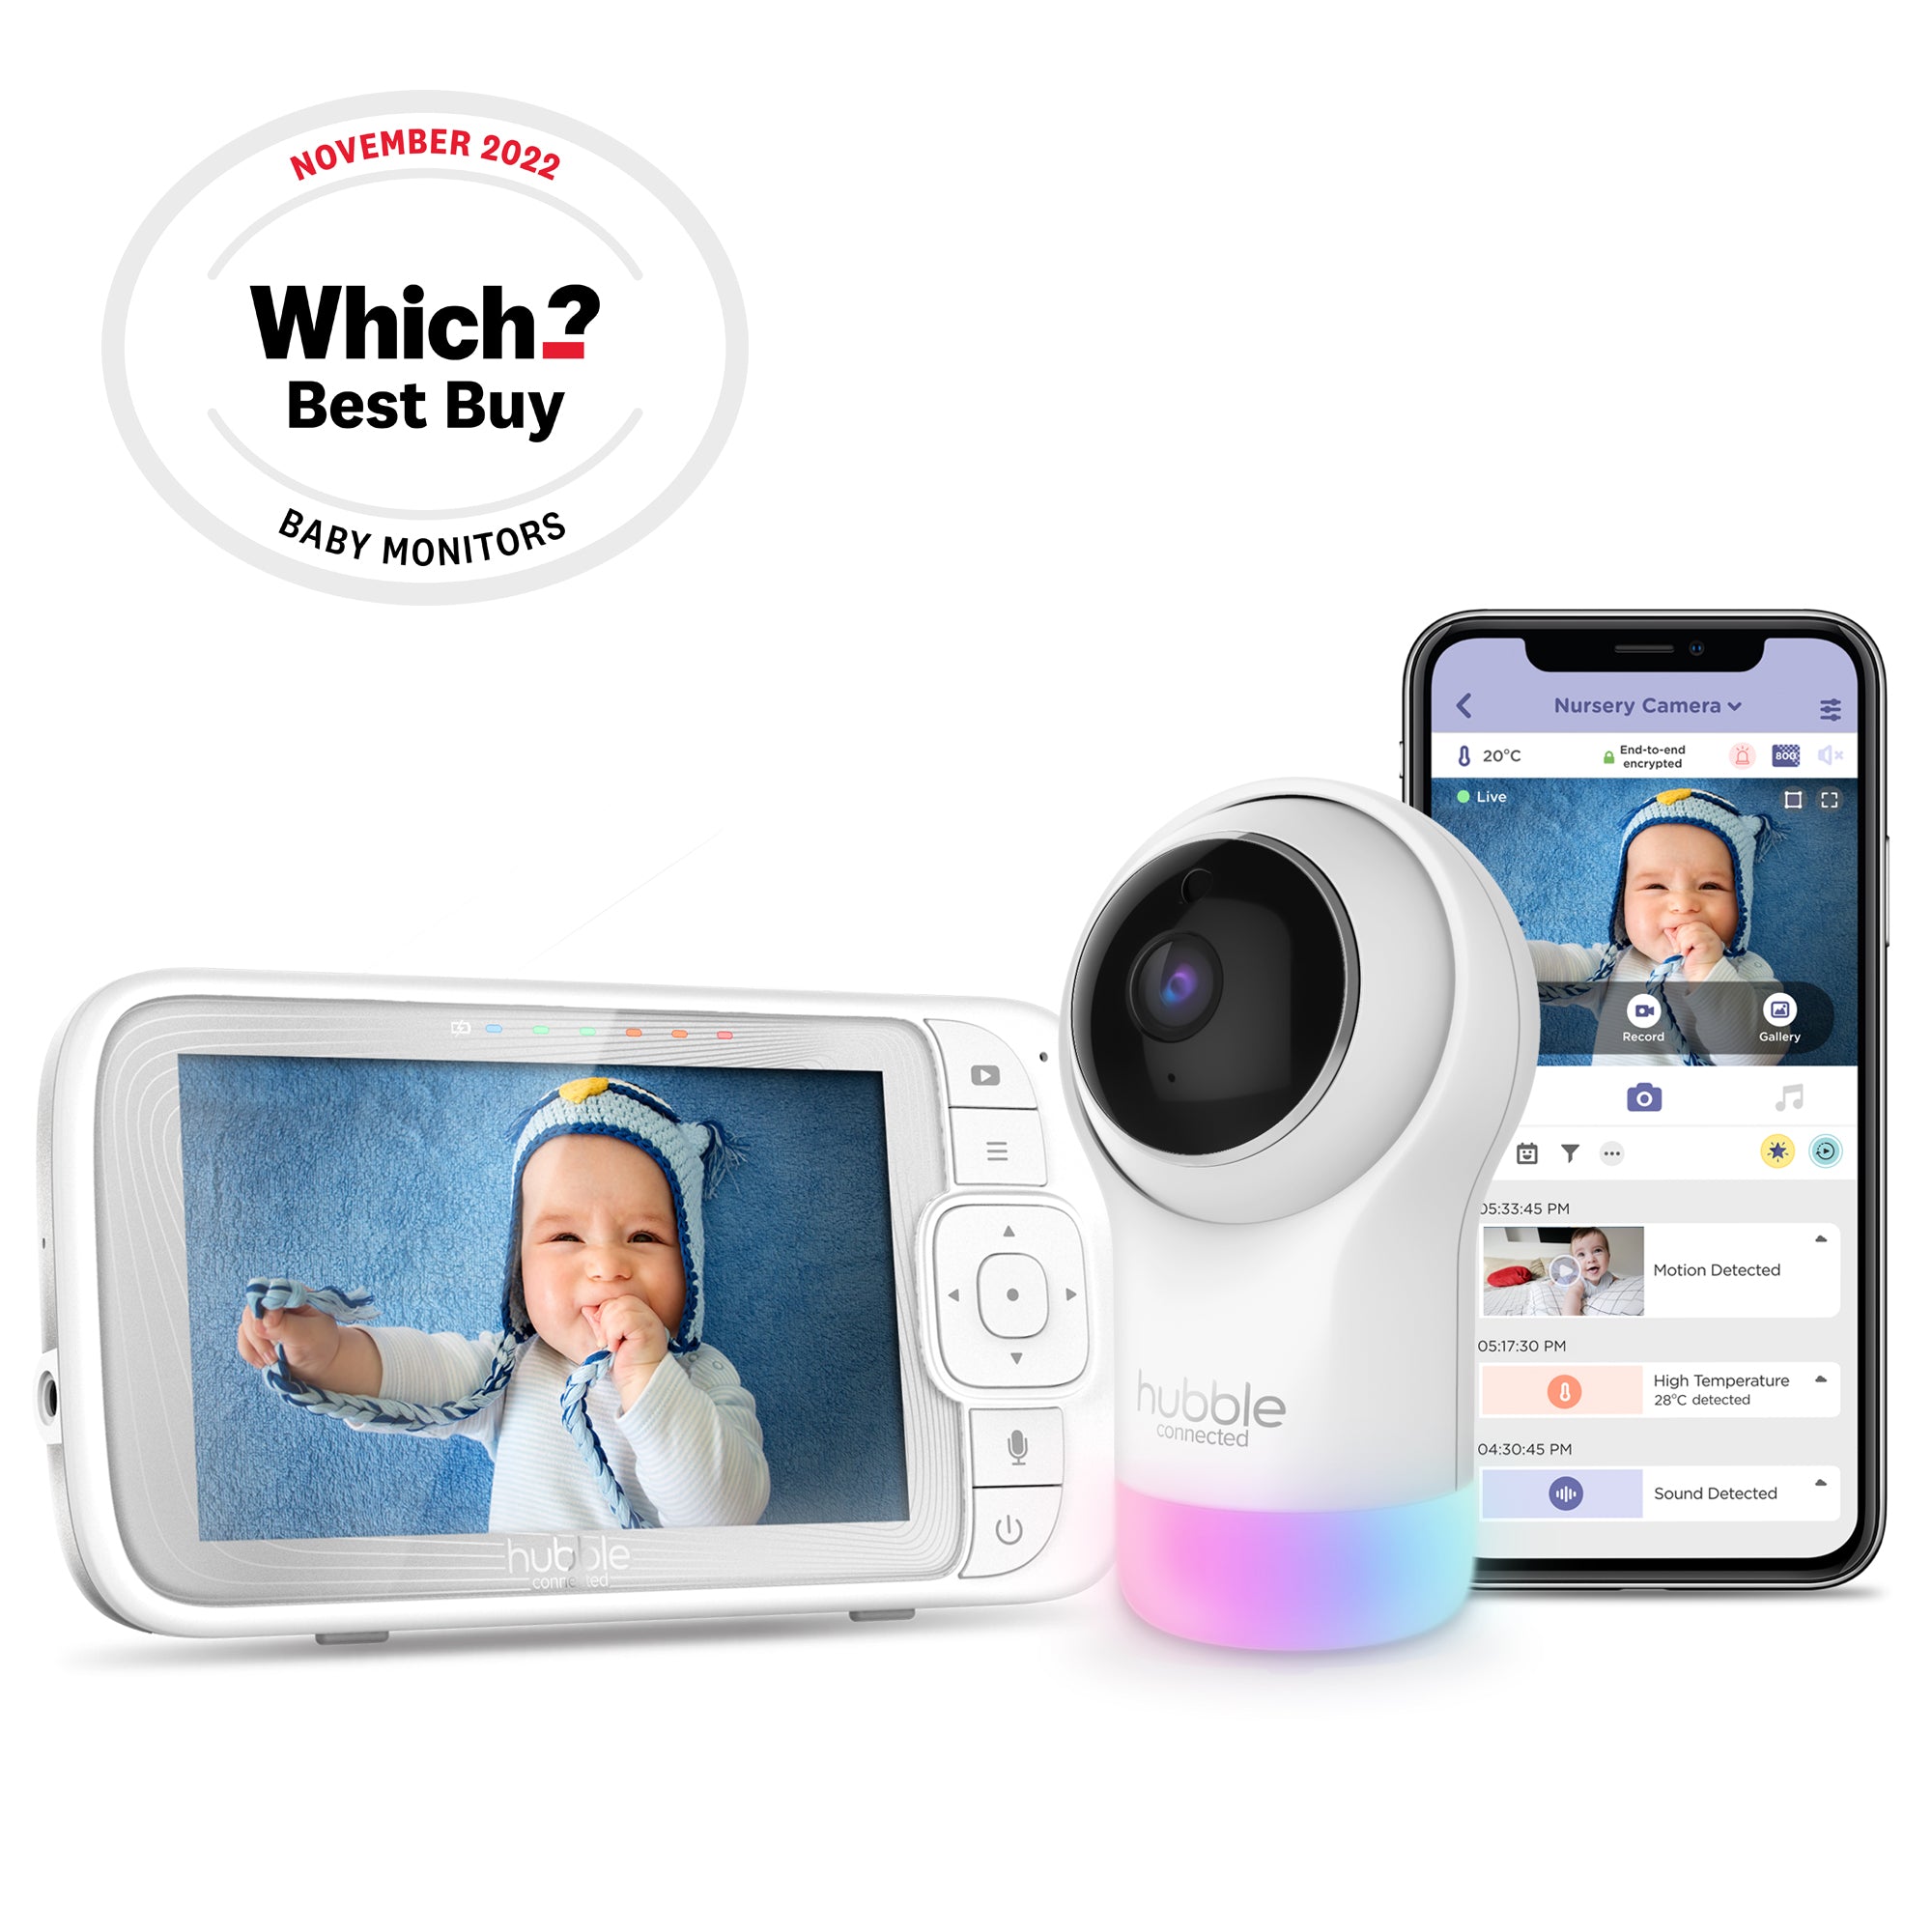 Hubble Connected Nursery Pal Glow+ Smart Video Monitor Featured in Nursery Today: A Top Choice for Parents Seeking a WiFi Baby Monitor with Video, Sound, and Two-Way Audio